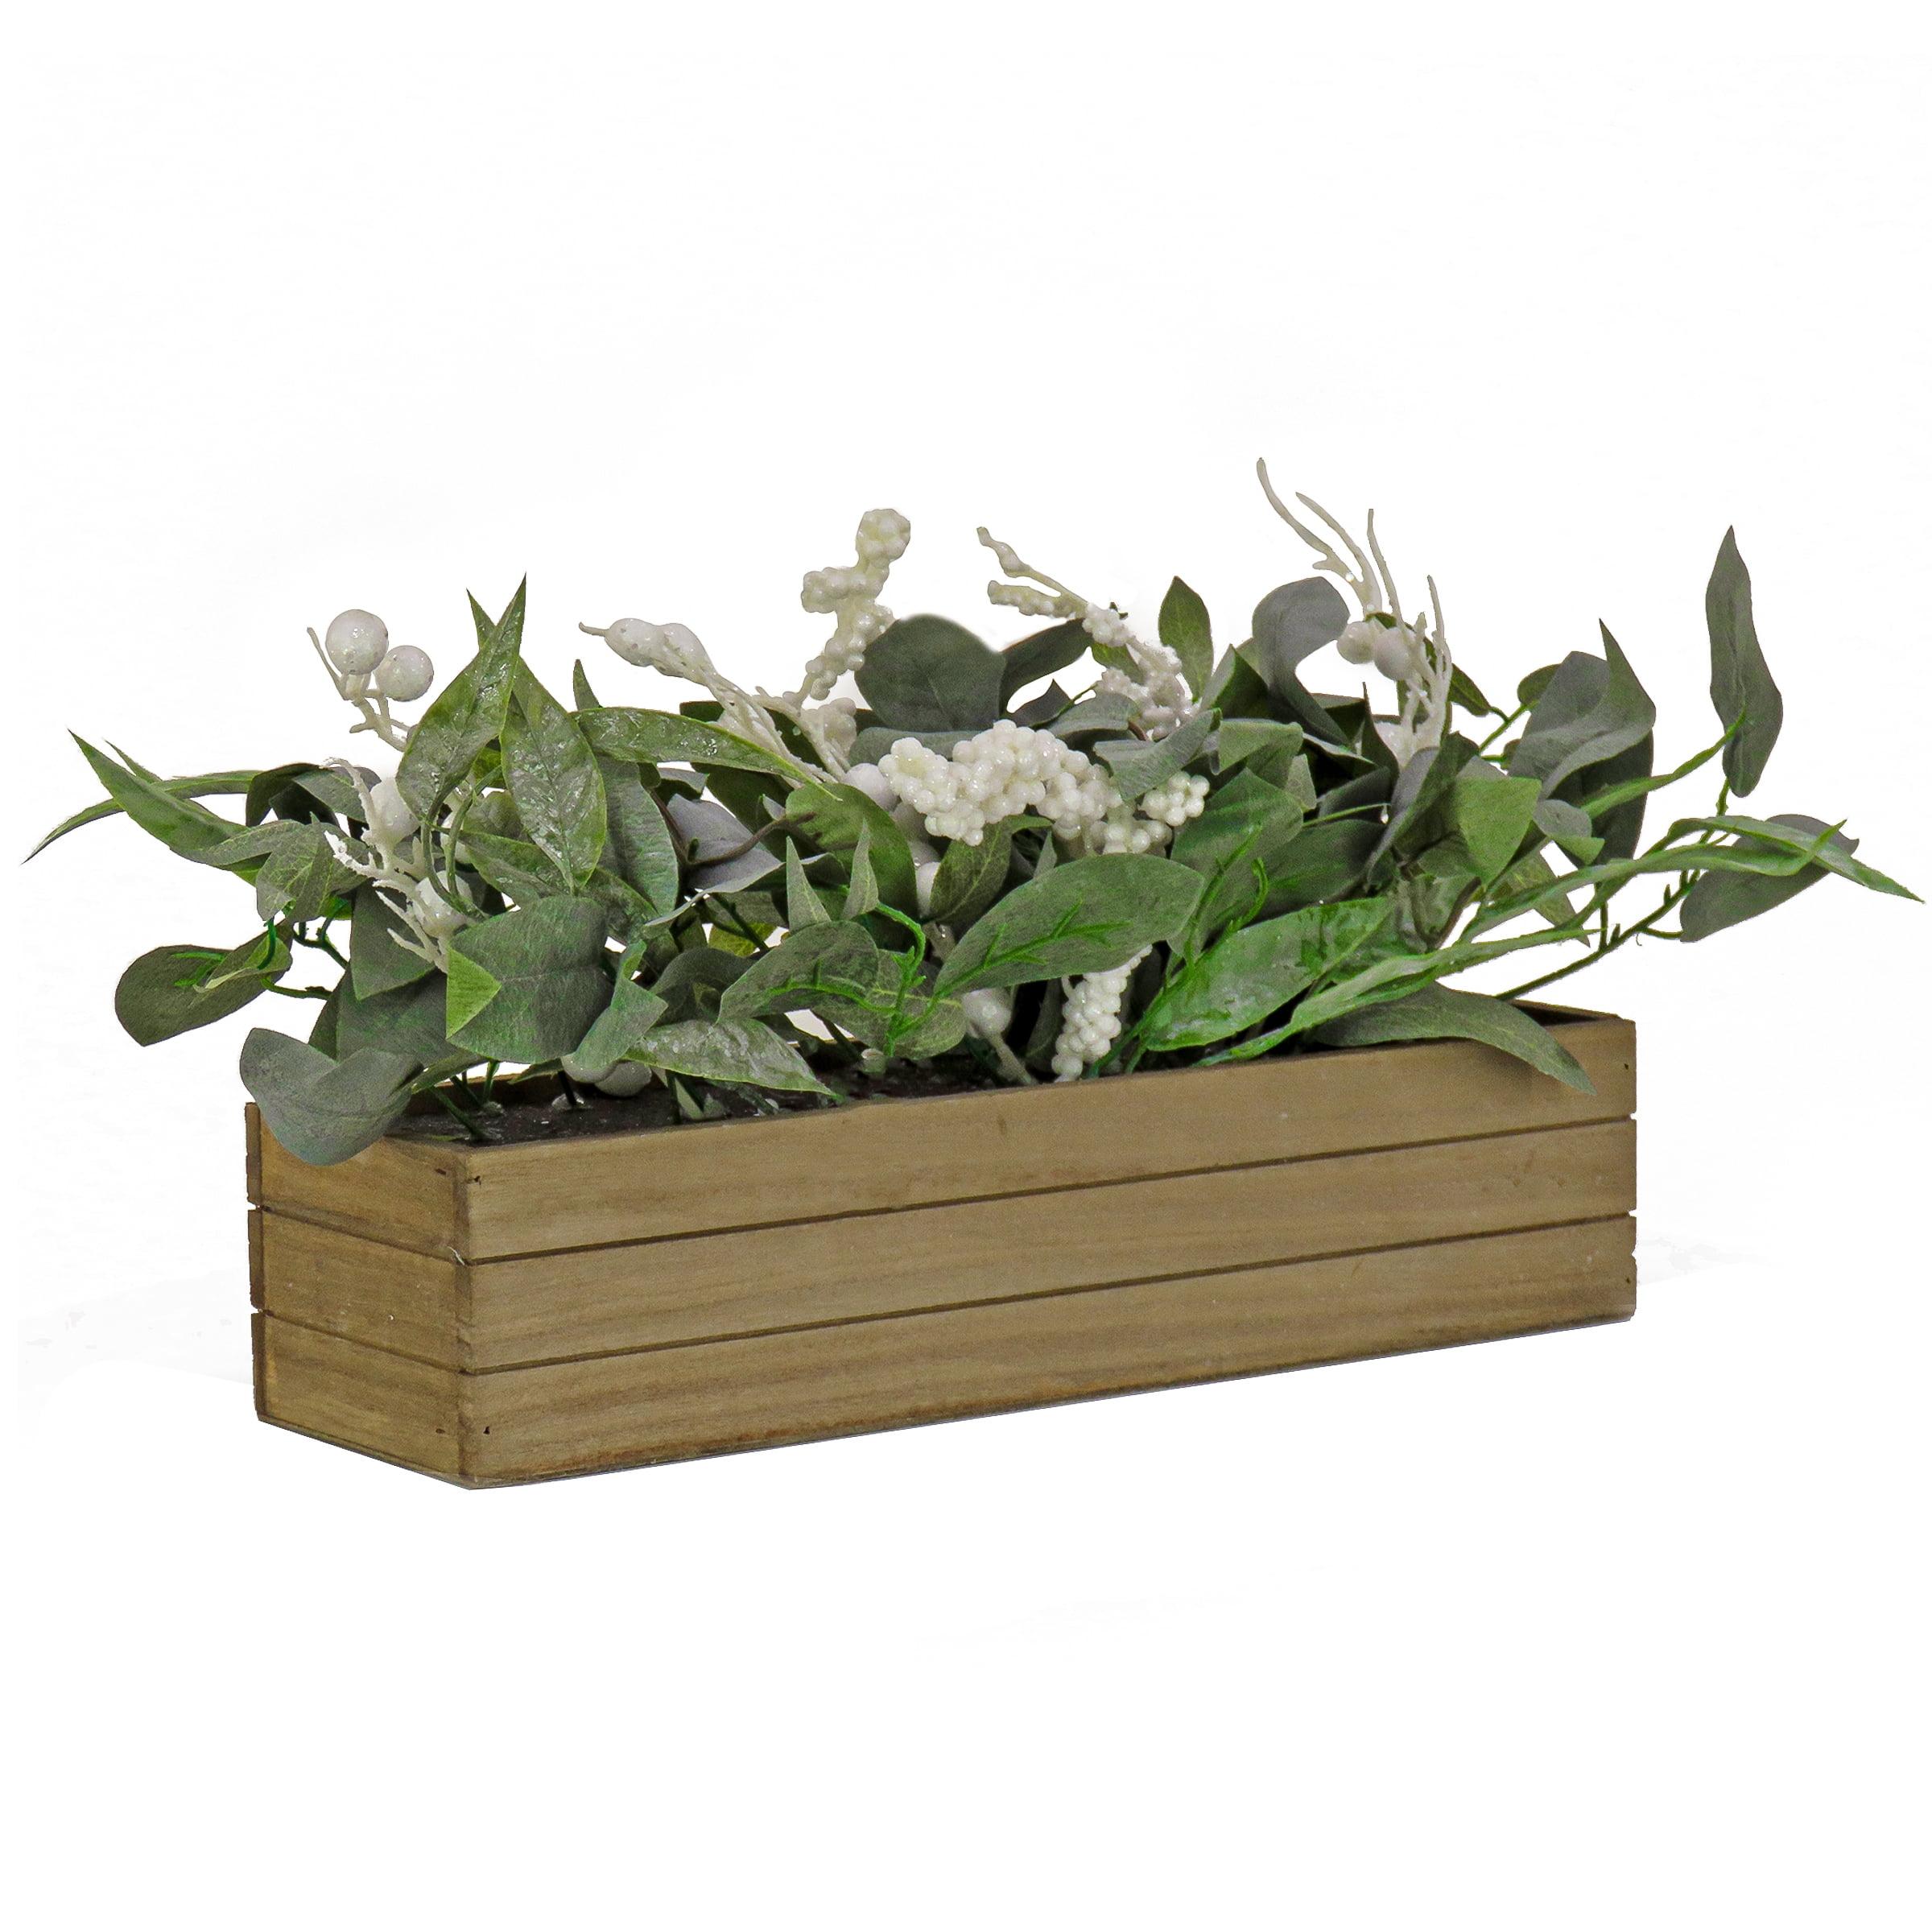 Rustic Holiday Planter Box with White Berry Greenery, 22"